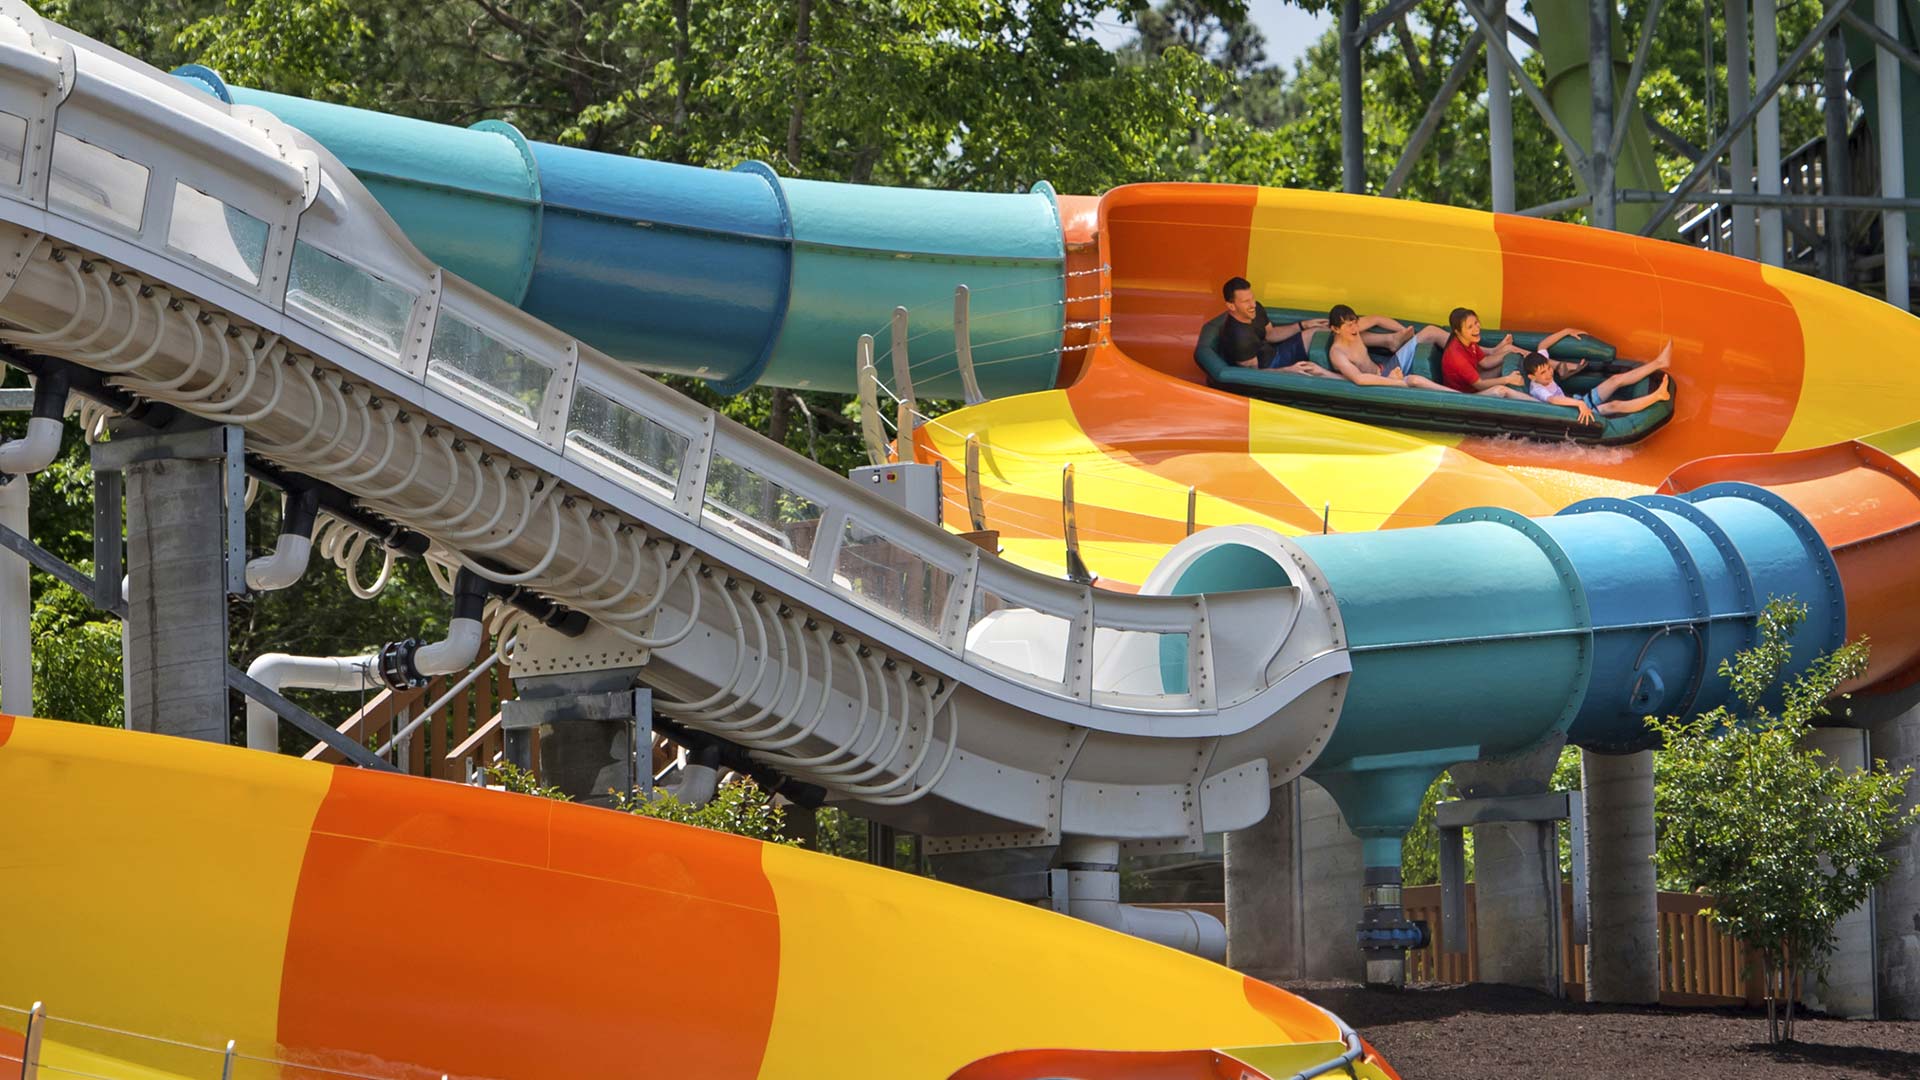 Cutback Water Coaster, Virginia's first water coaster now open at Water Country USA